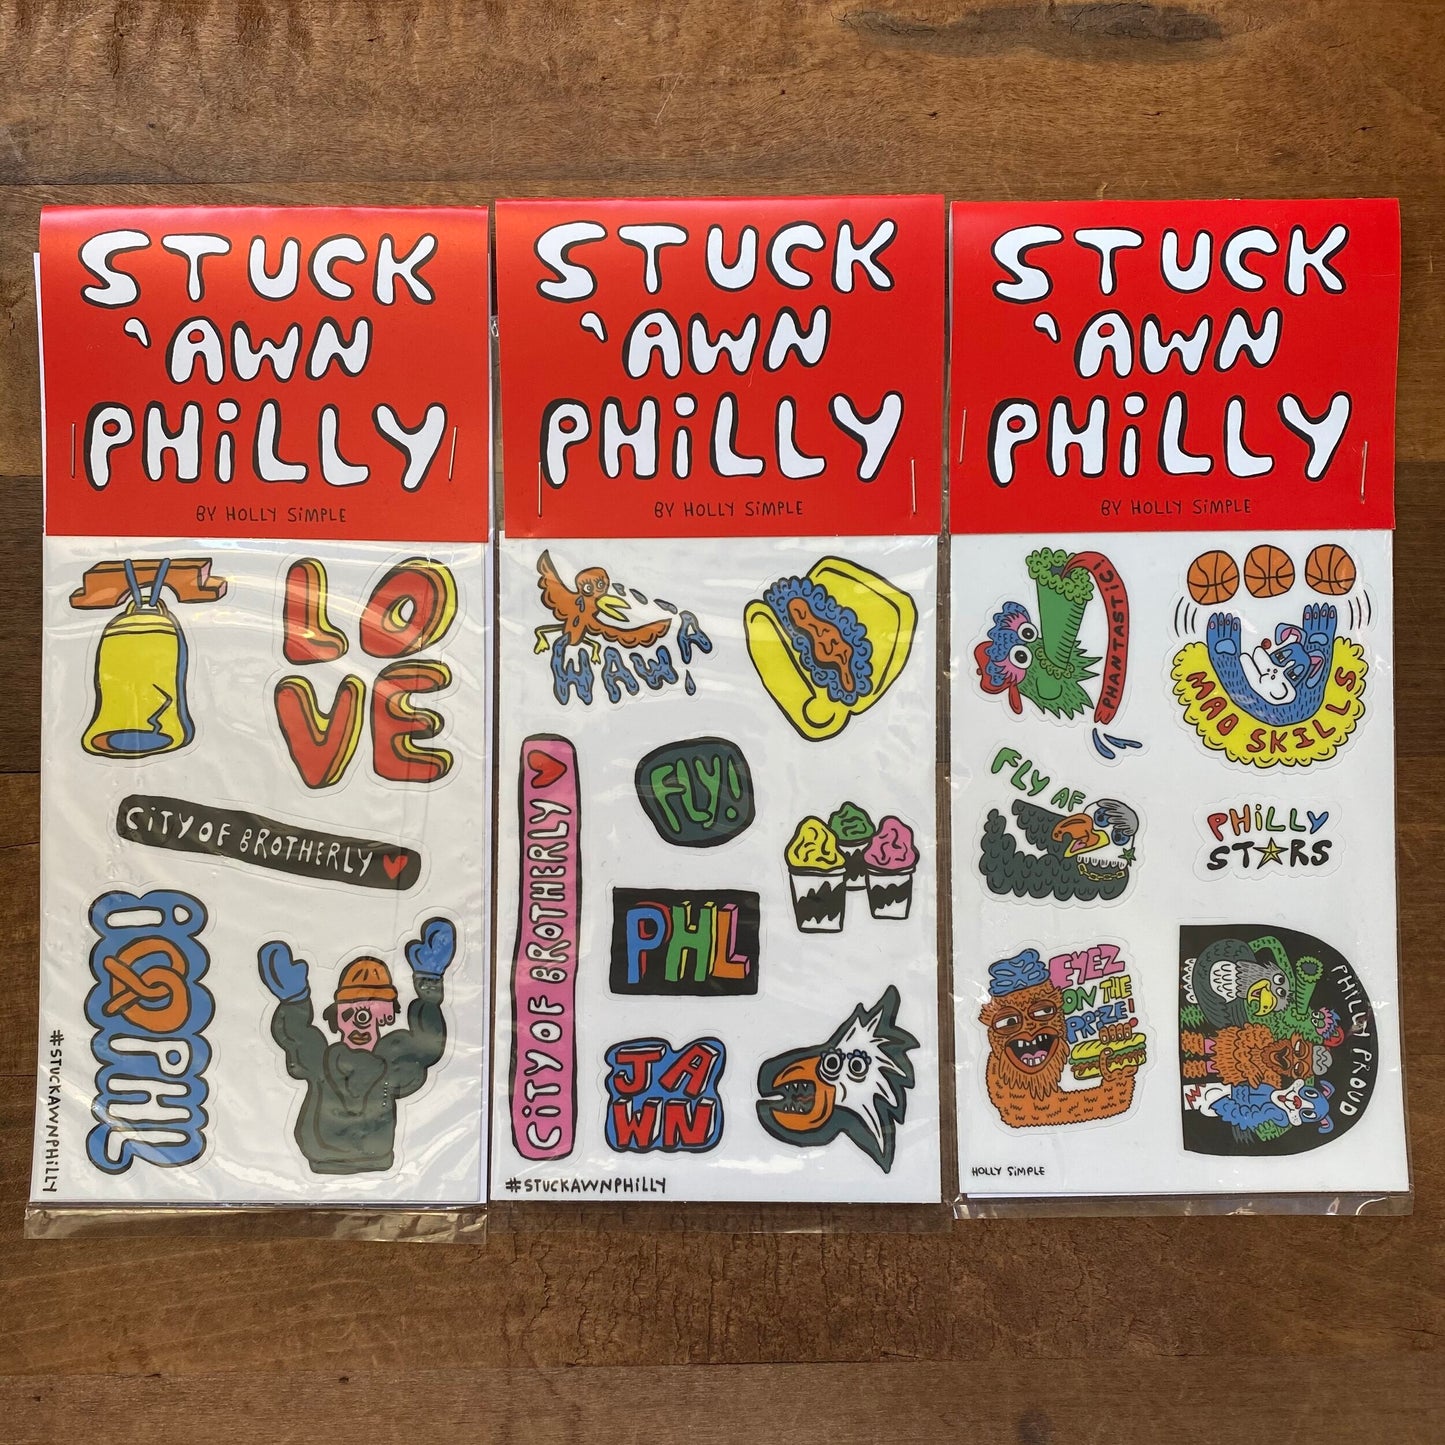 Collection of vibrant Holly Simple Philly Sticker Packs, including Rocky and Wawa designs, displayed on a wooden surface.